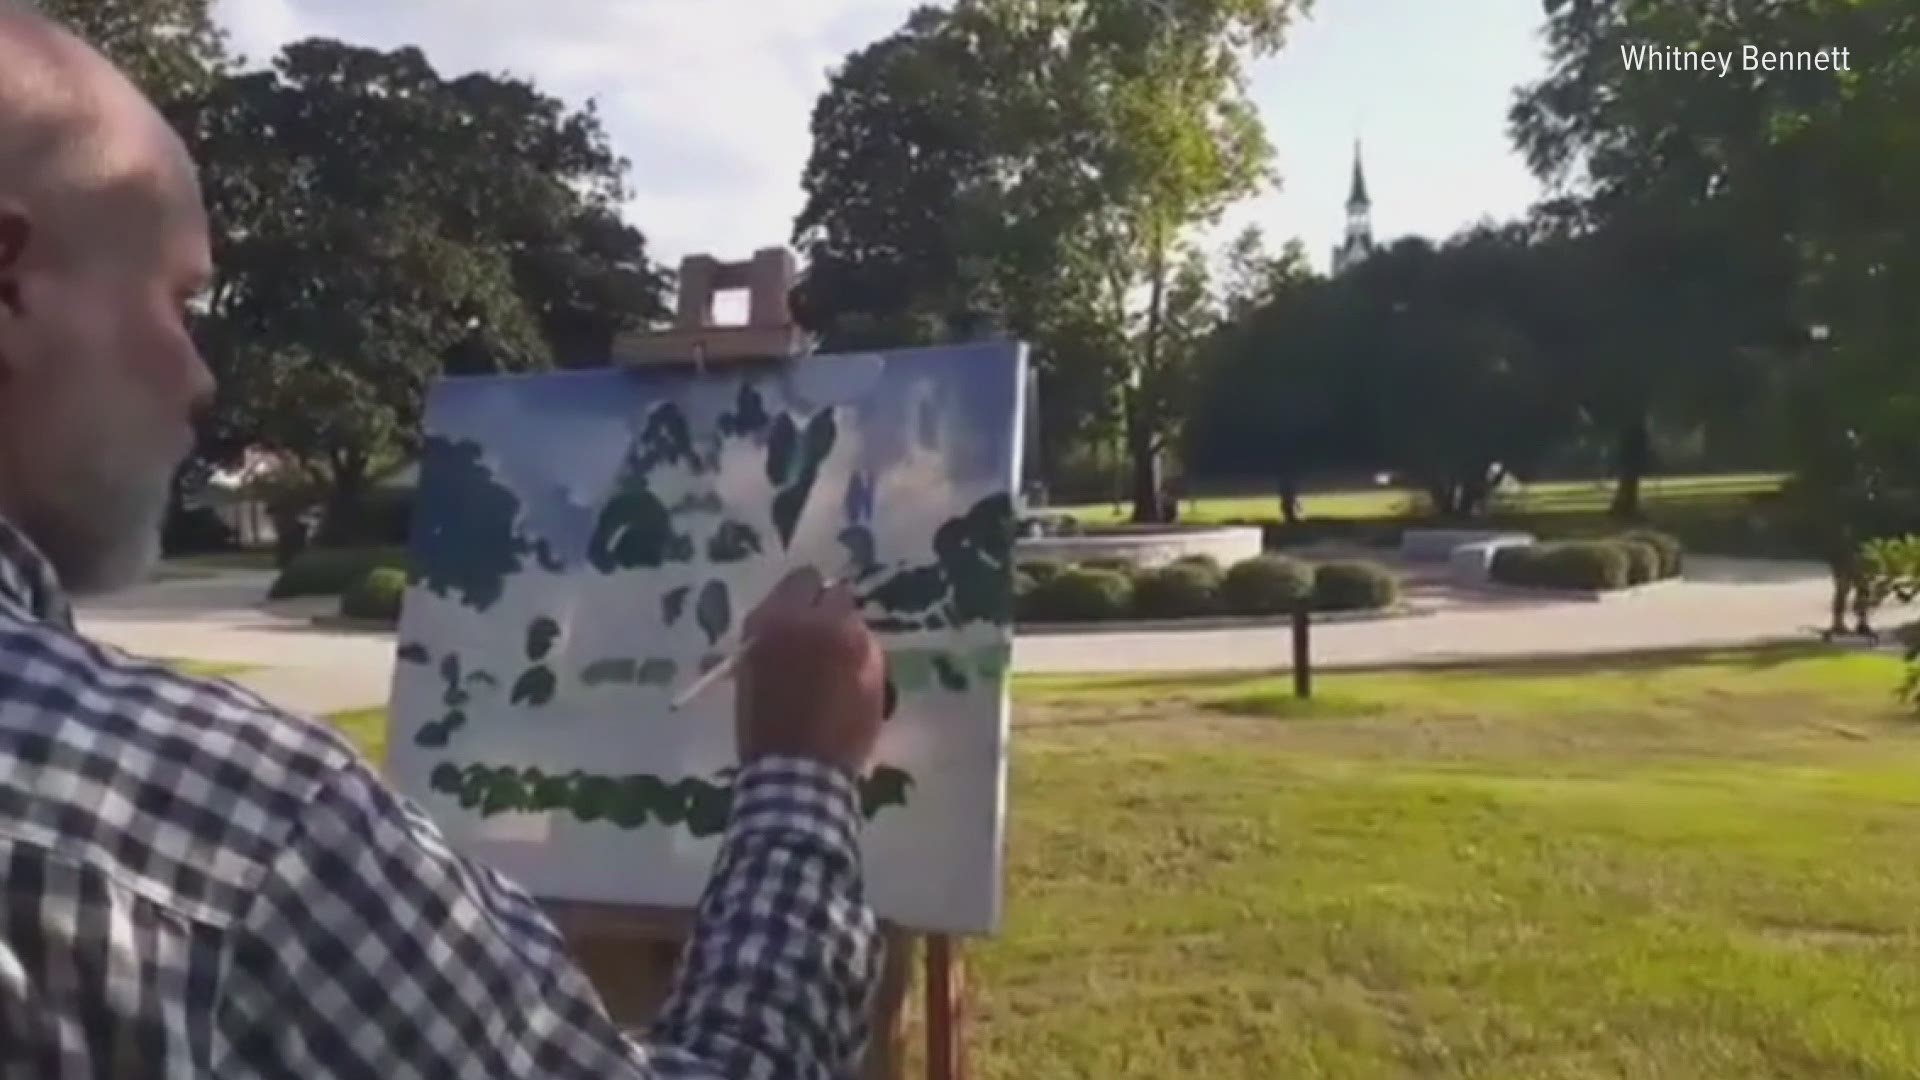 Whitney Bennett is taking his easel and talent all over Macon to shine a light on some of his hometown's greatest views